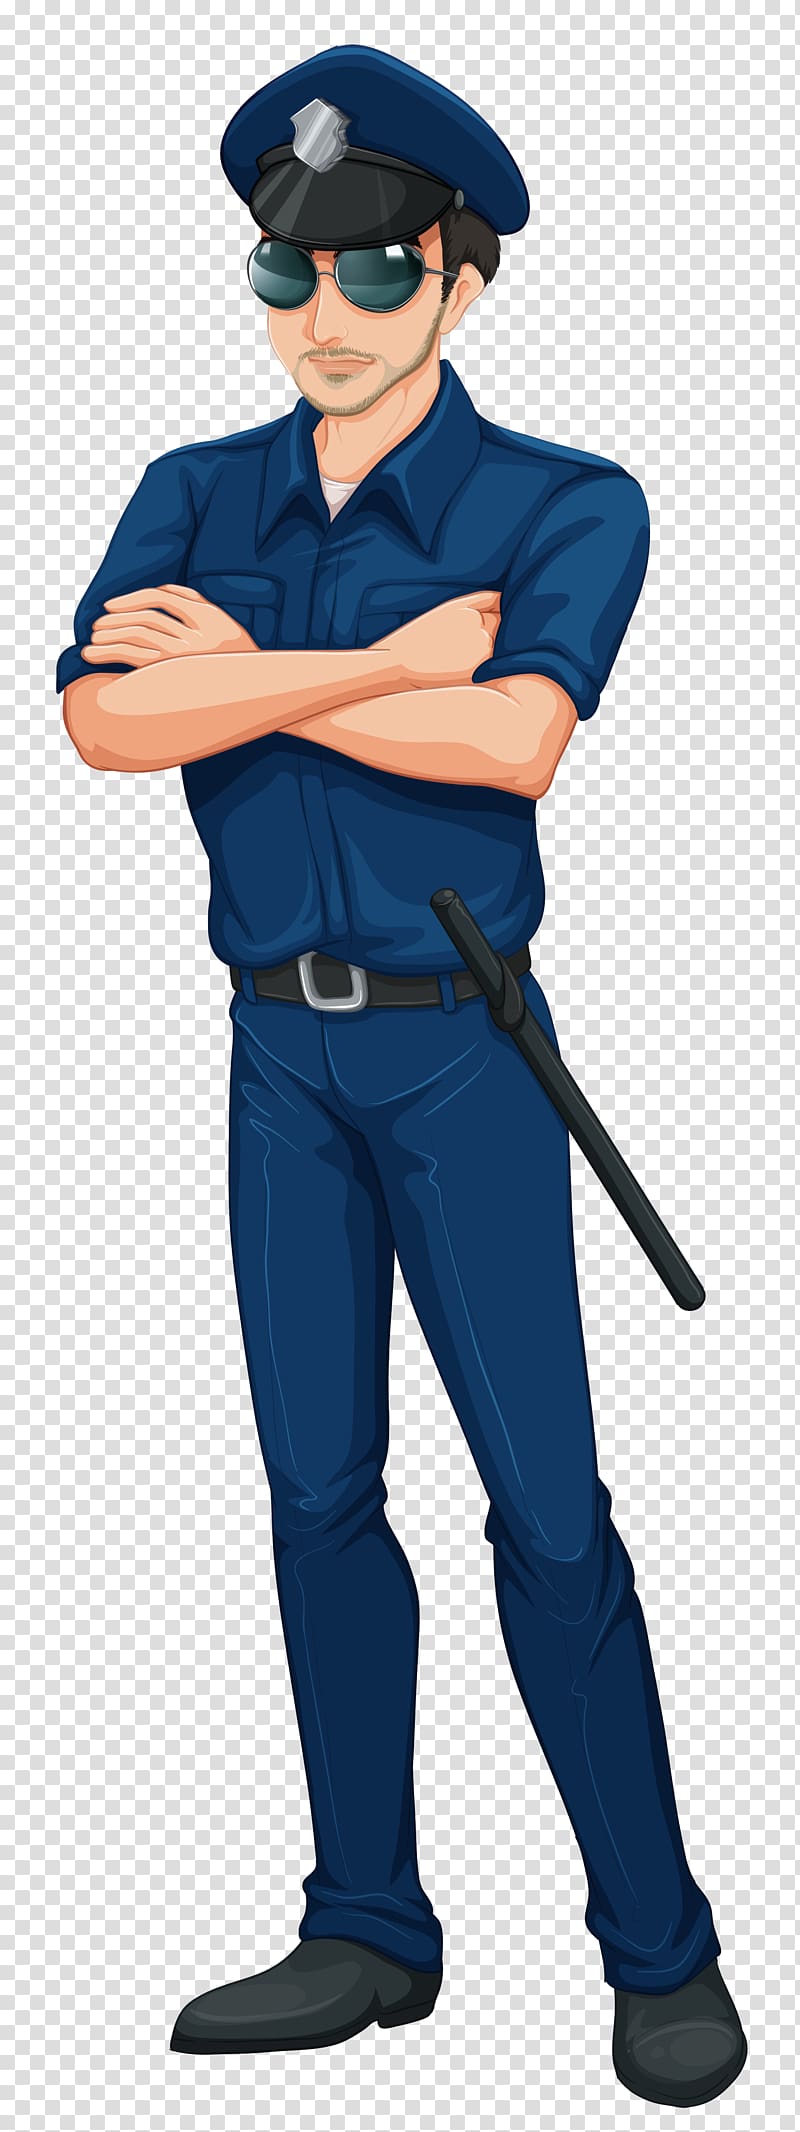 Police officer Royal Canadian Mounted Police Illustration, Police transparent background PNG clipart